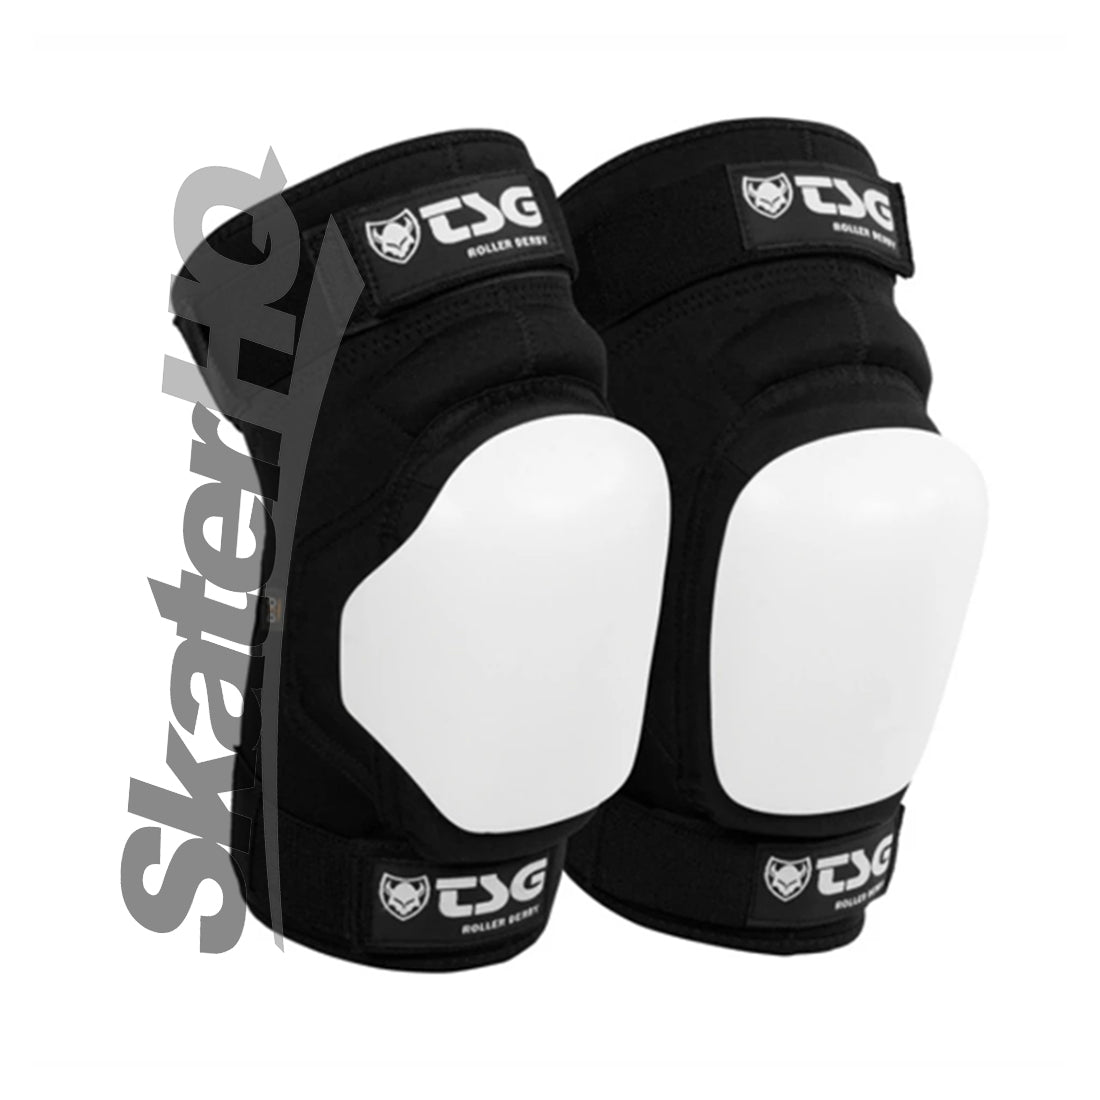 TSG Rollerderby Knee - Large Protective Gear